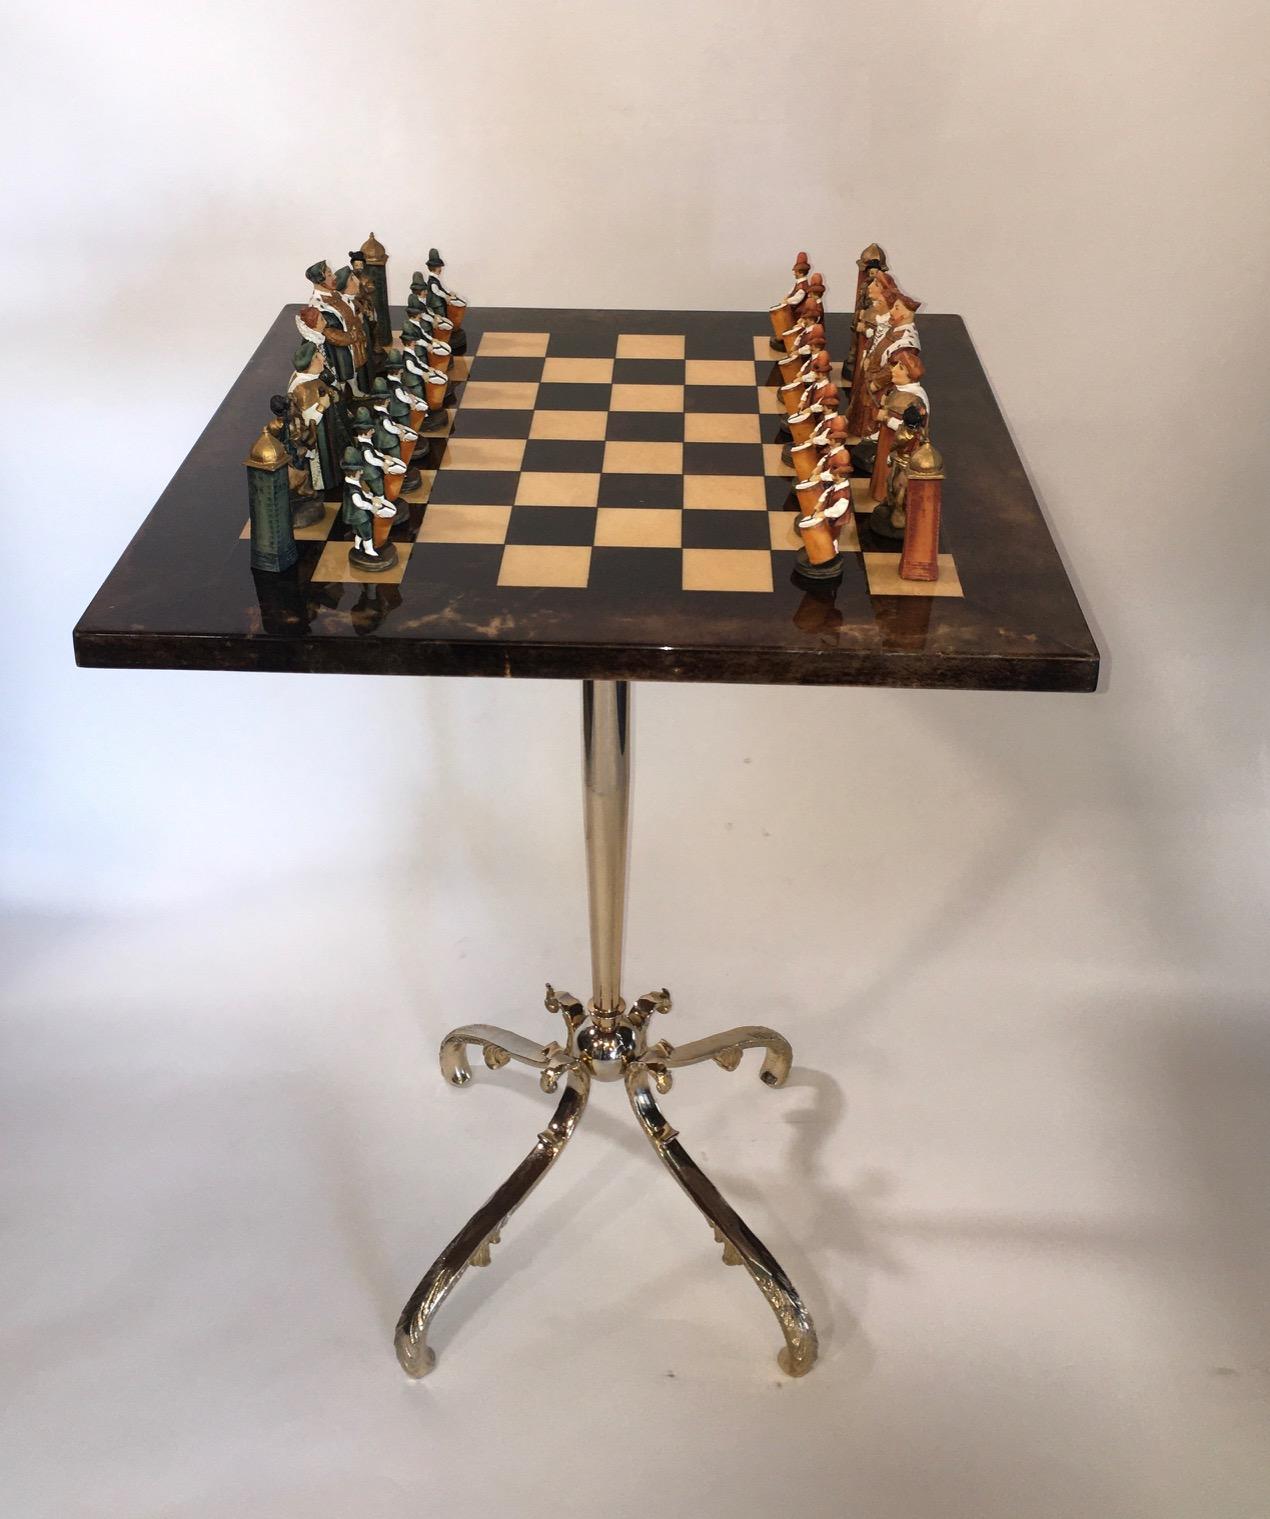 Pedestal parchment game table by Aldo Tura.
Chess pieces come included with the table.